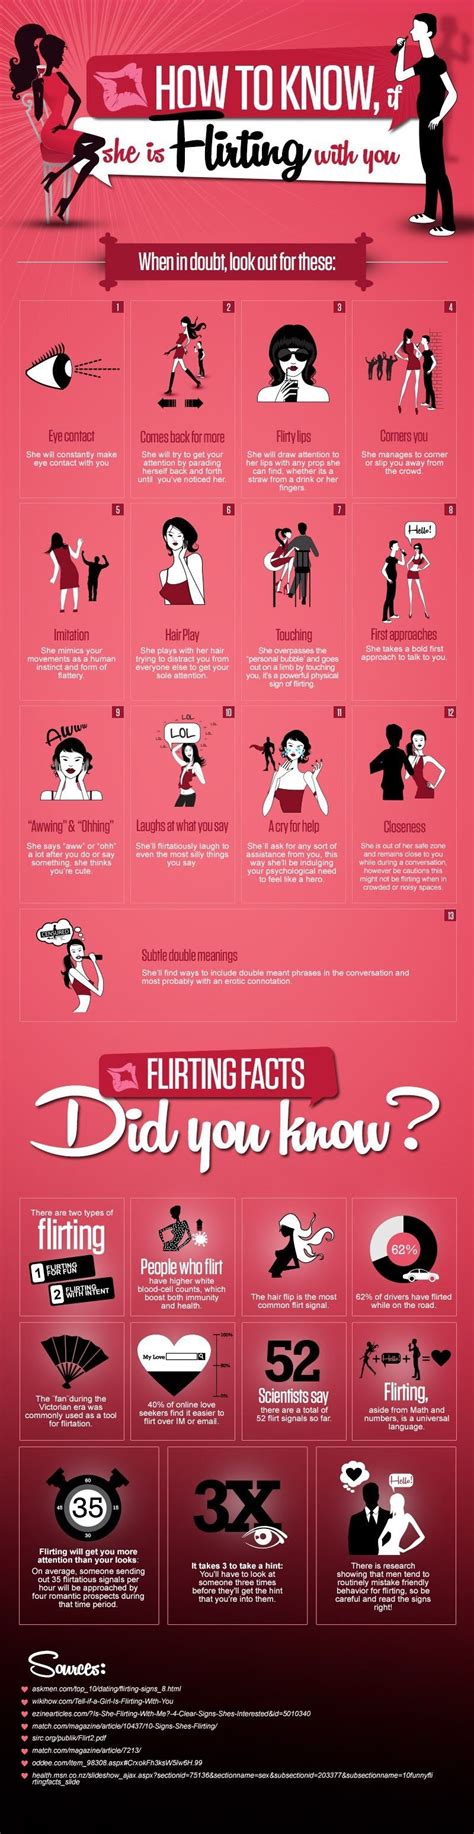 What are flirty signs?